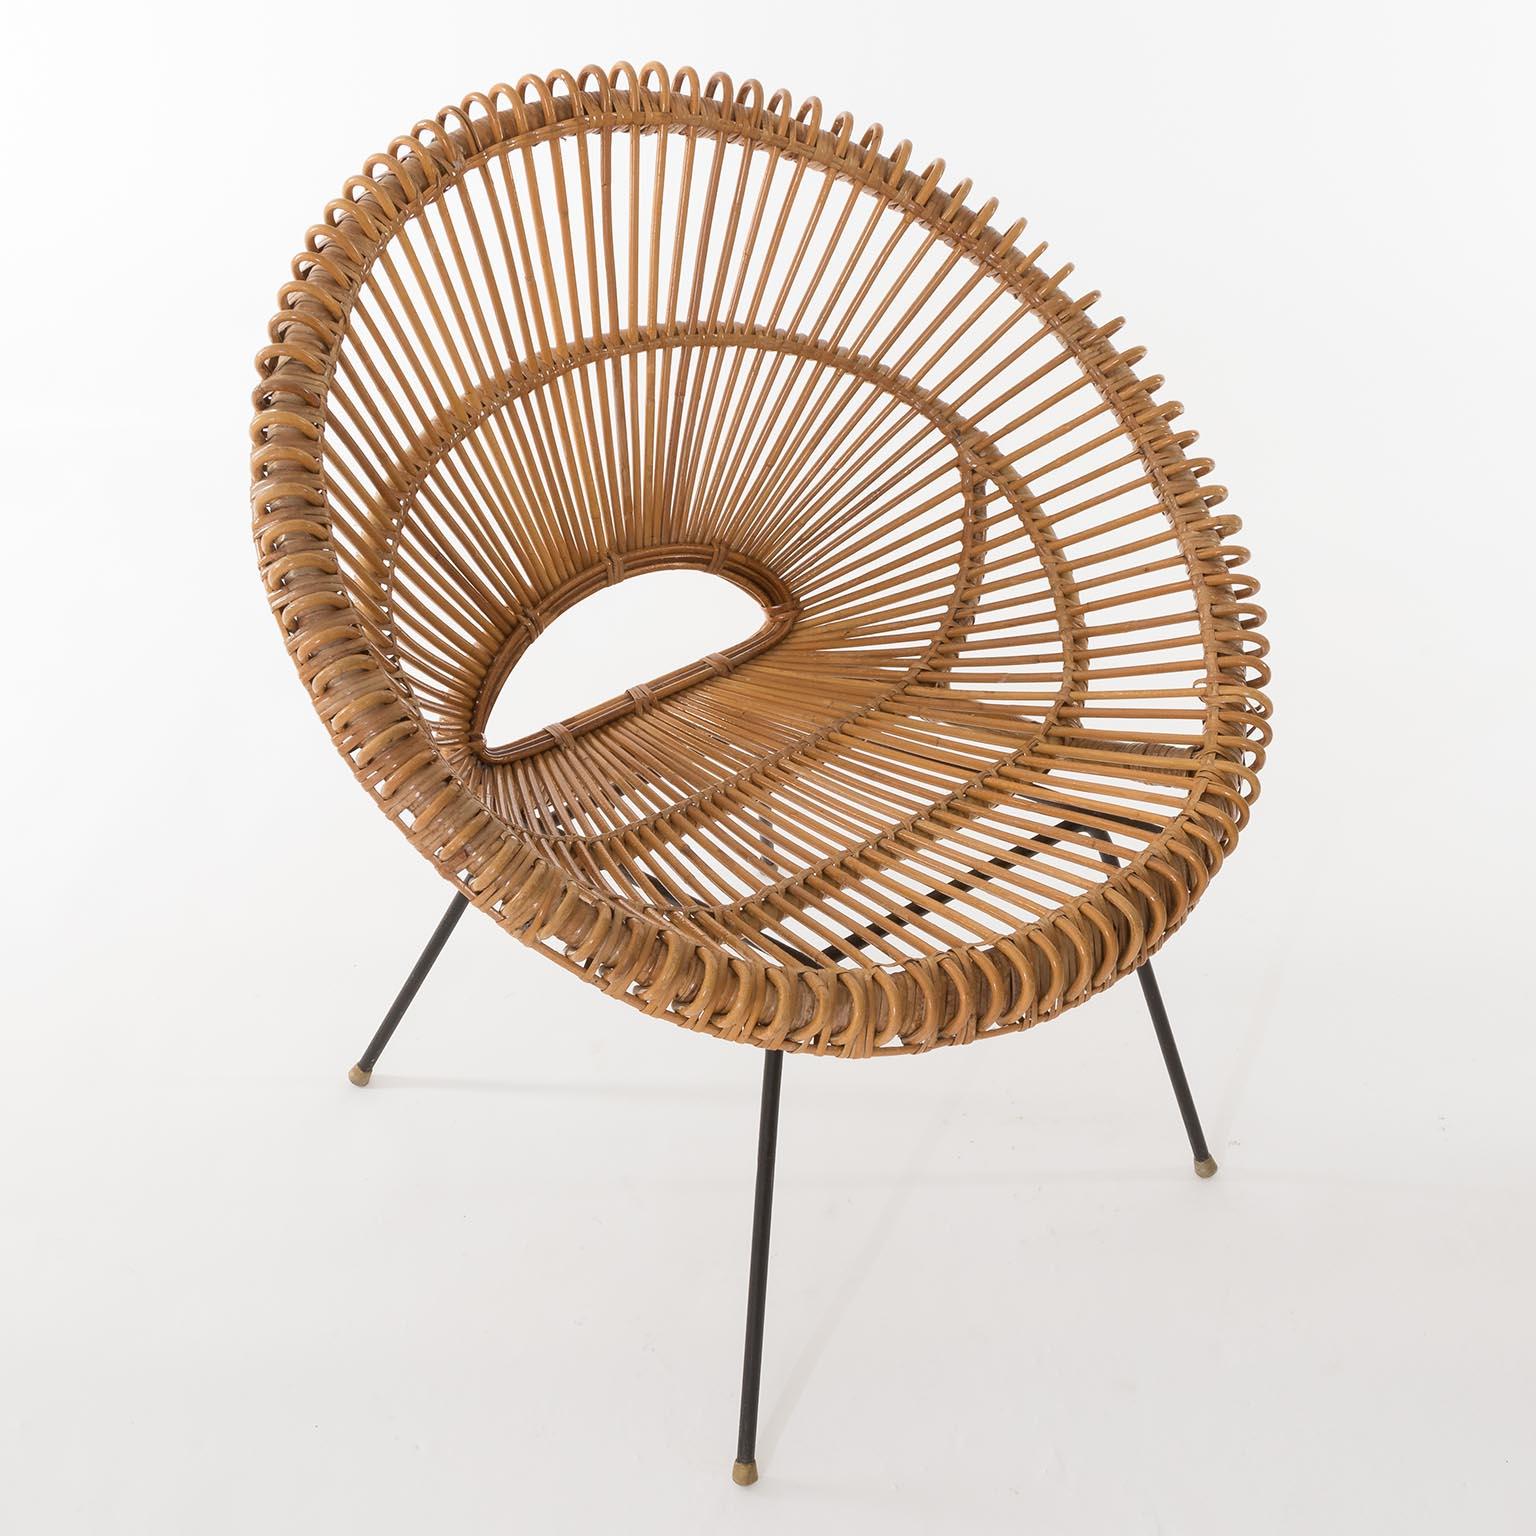 Set Four Mid-Century Modern Rattan Bamboo Chairs, Janine Abraham, Dirk Rol, 1960 For Sale 1